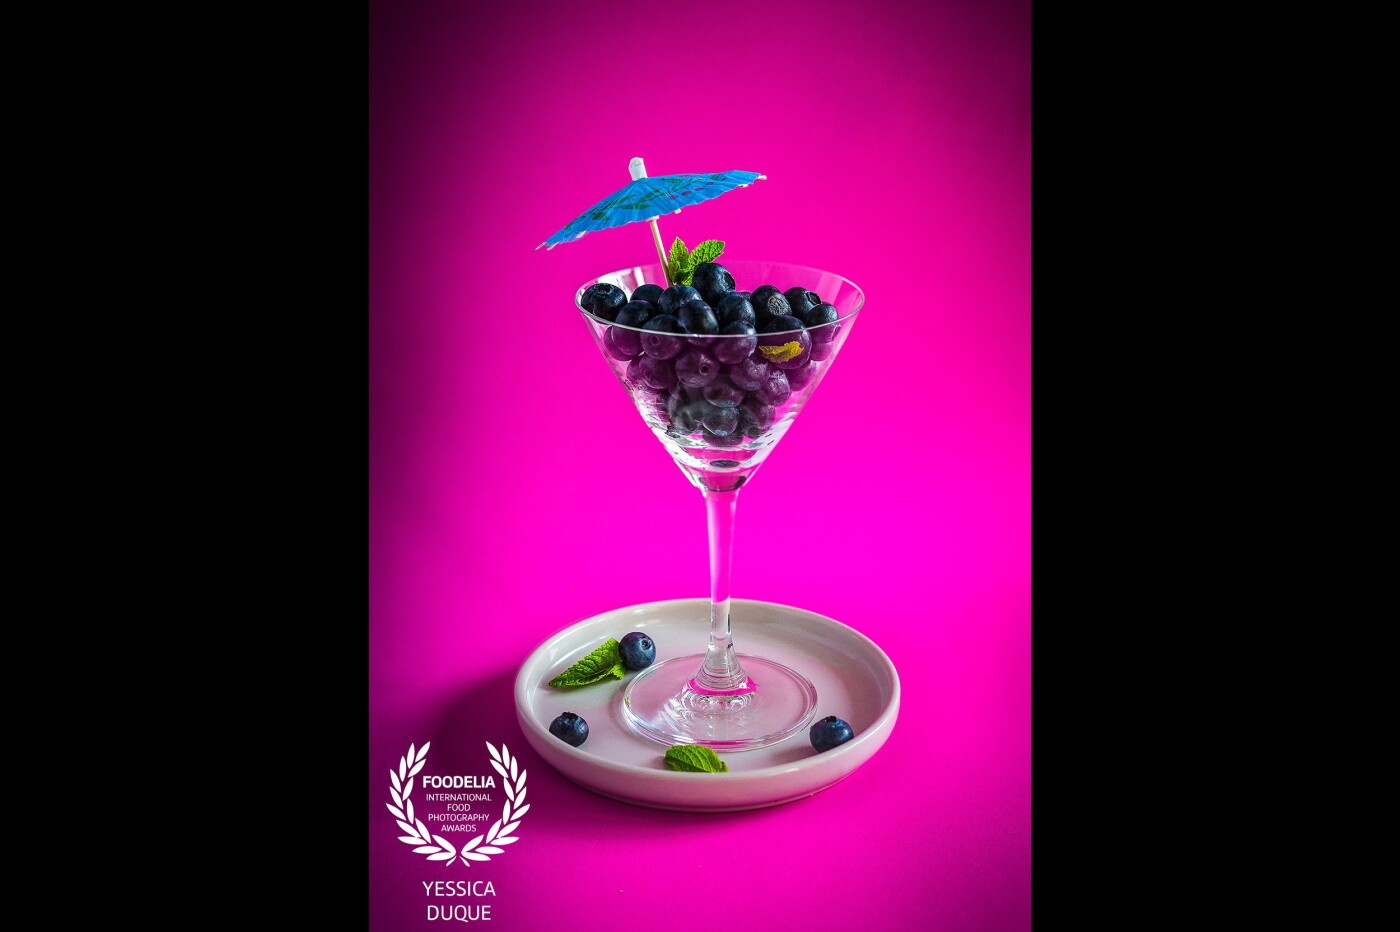 Almost Friday... Let me cheer you up with a Blueberry Martini... I know there is no alcohol in it, don’t blame me for trying <br />
Camera: Canon 5D mark iii <br />
Lens: 50 mm <br />
Settings: ISO 500, 1/50 sec at ƒ4.5, daylight<br />
